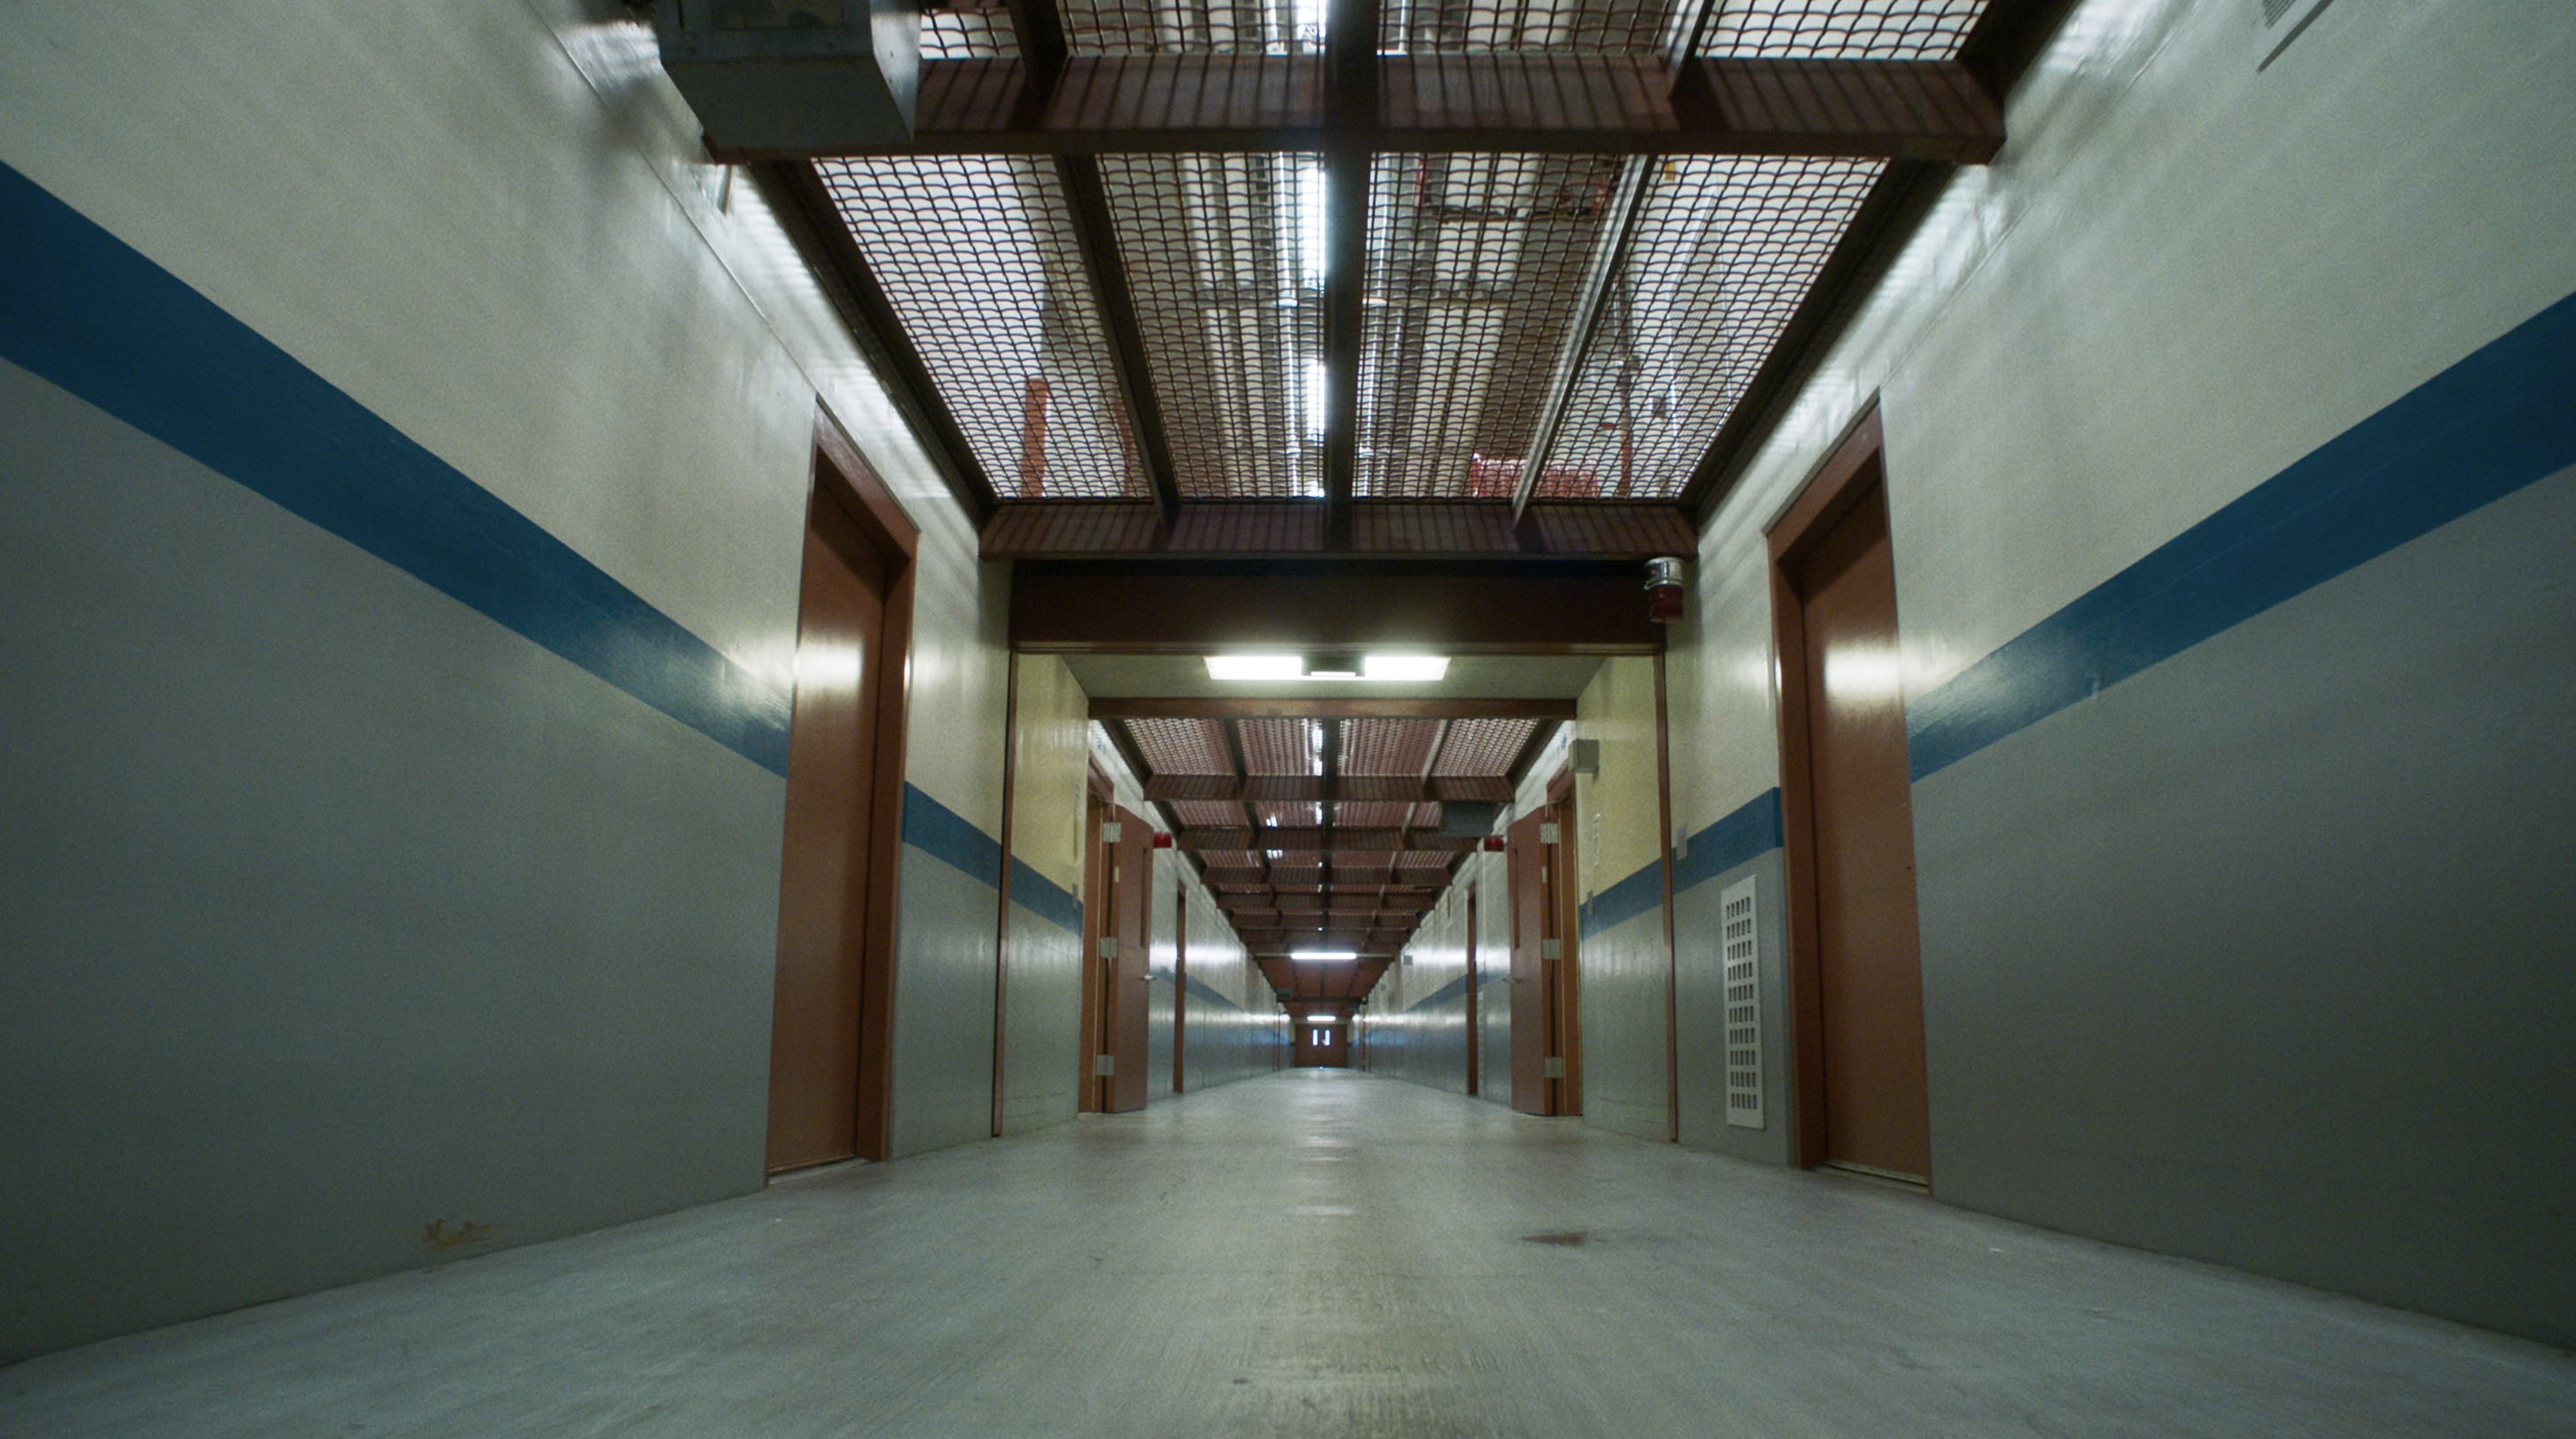 A film still from The Strike that shows the long bleak corridors of a prison.